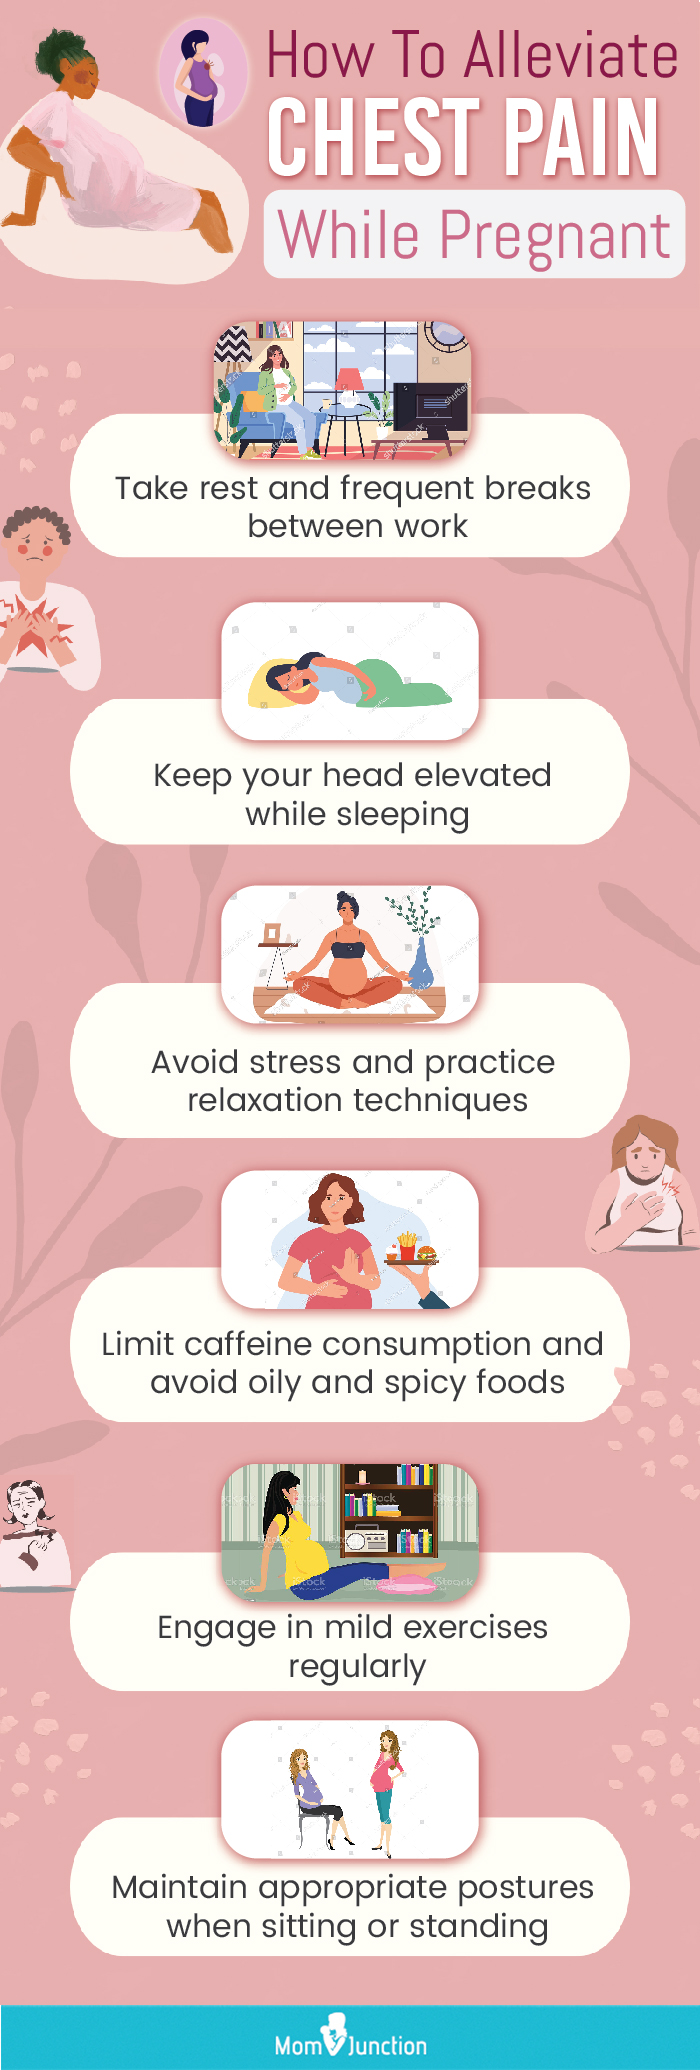 tips to get relief from chest pain during pregnancy [infographic]